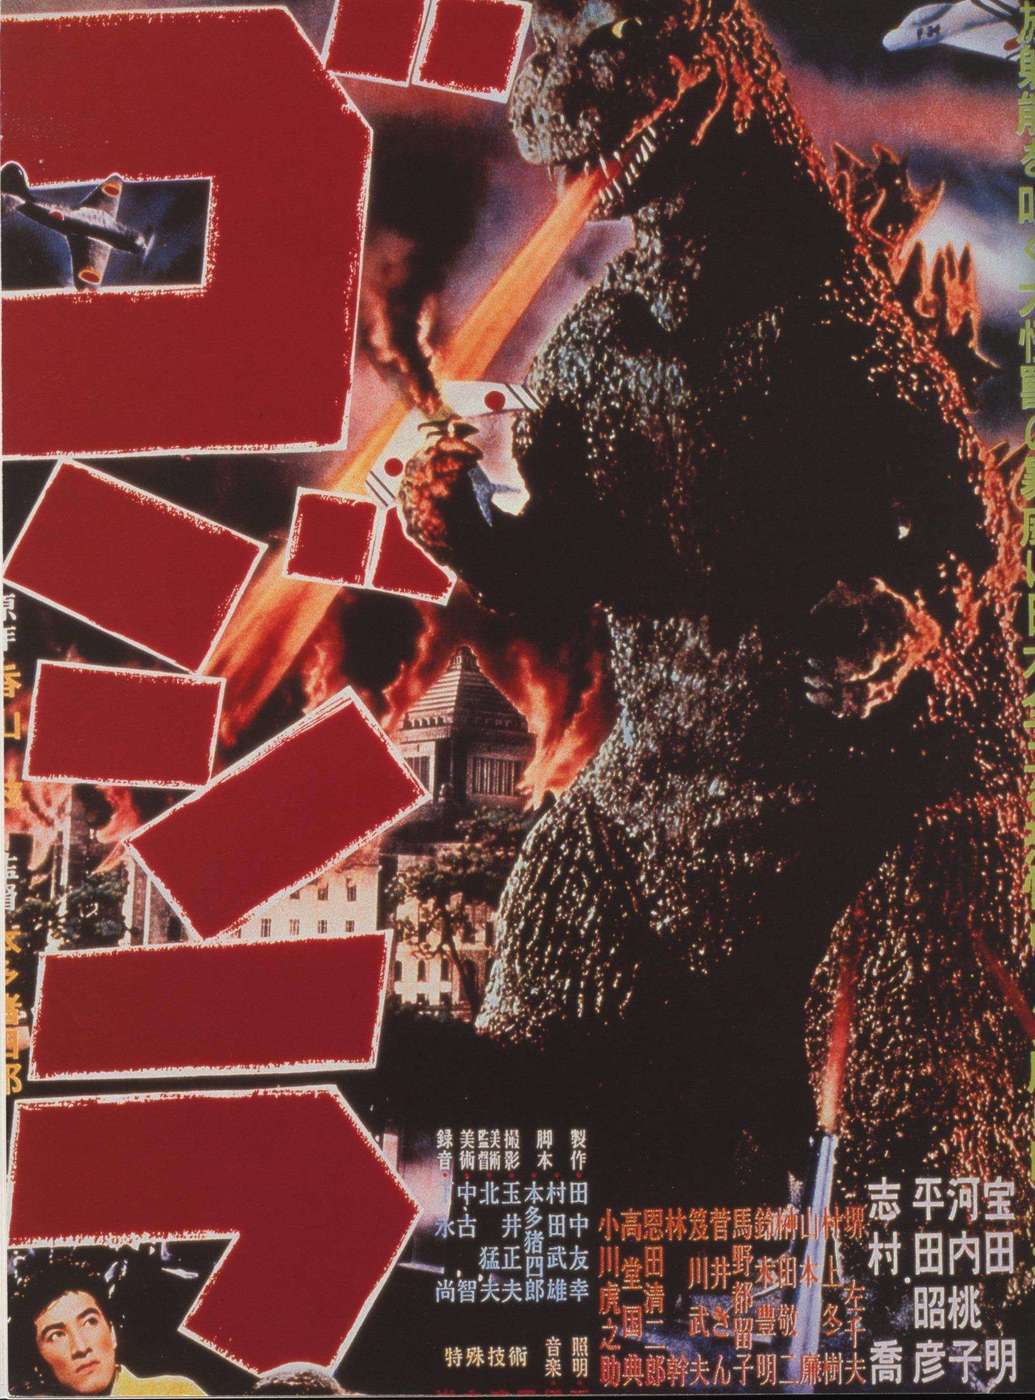 Caption right, opposite page: Godzilla, 1954, Film poster, Approx. 72 × 51 cm